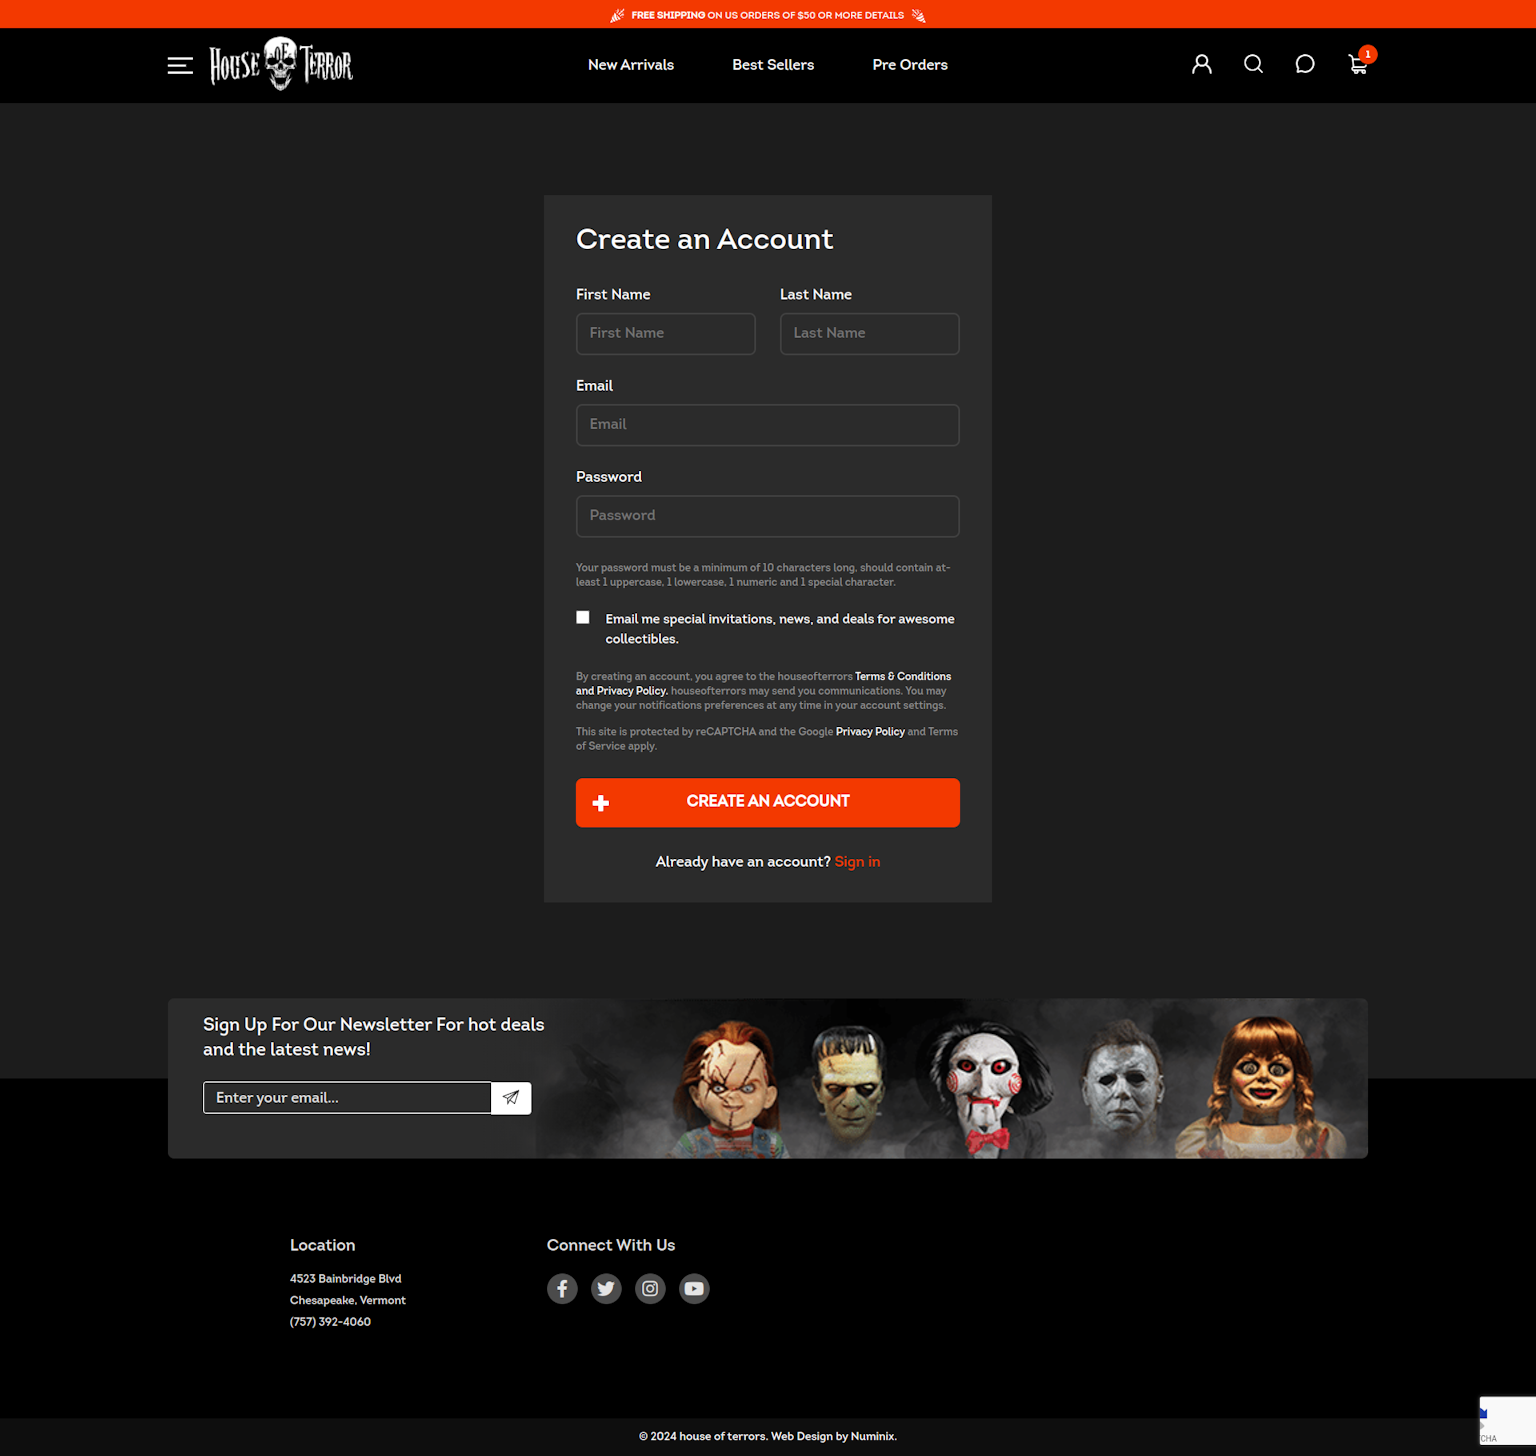 House of terror login page